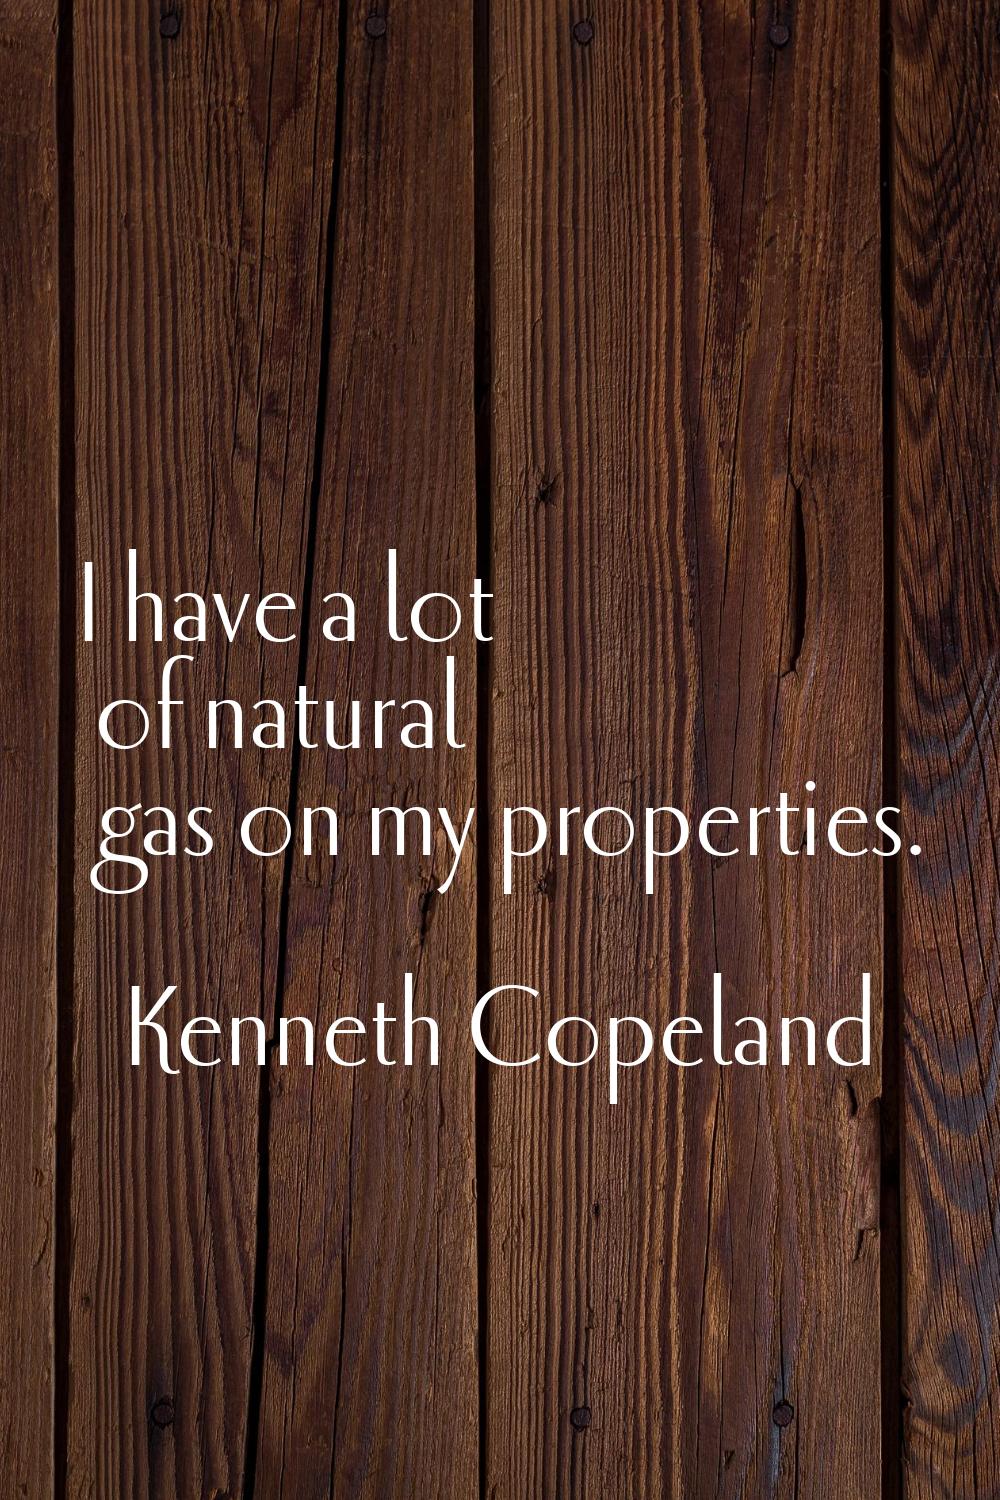 I have a lot of natural gas on my properties.